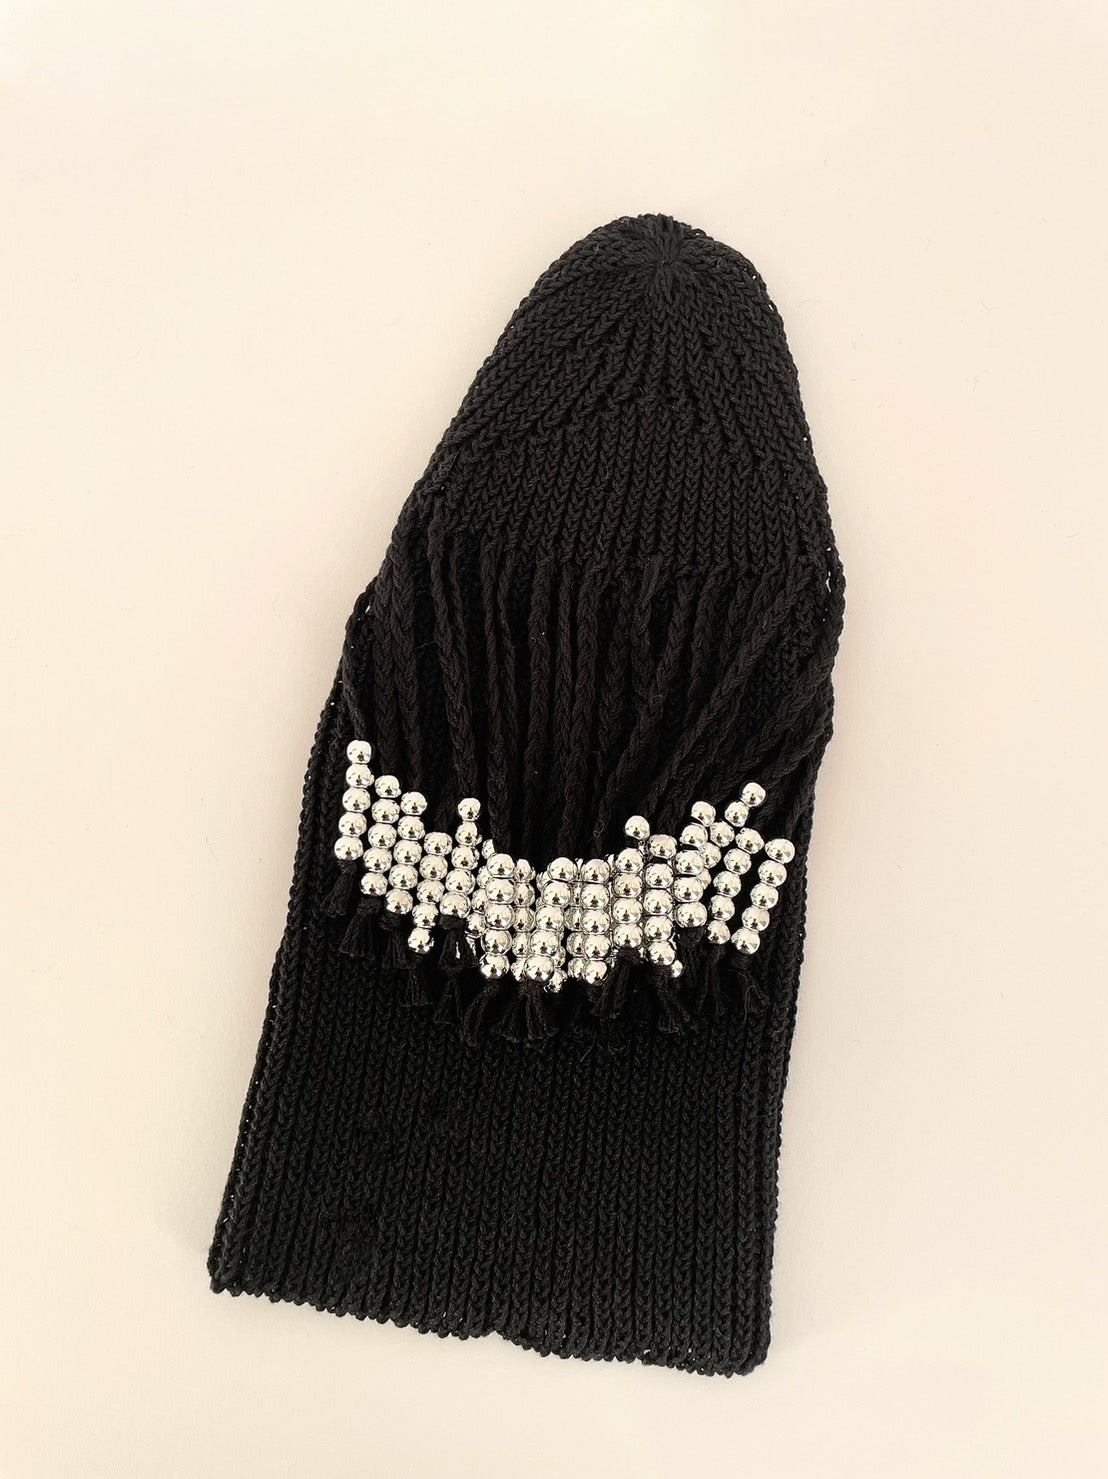 【COTTON】BLACK with SILVER  BEADS